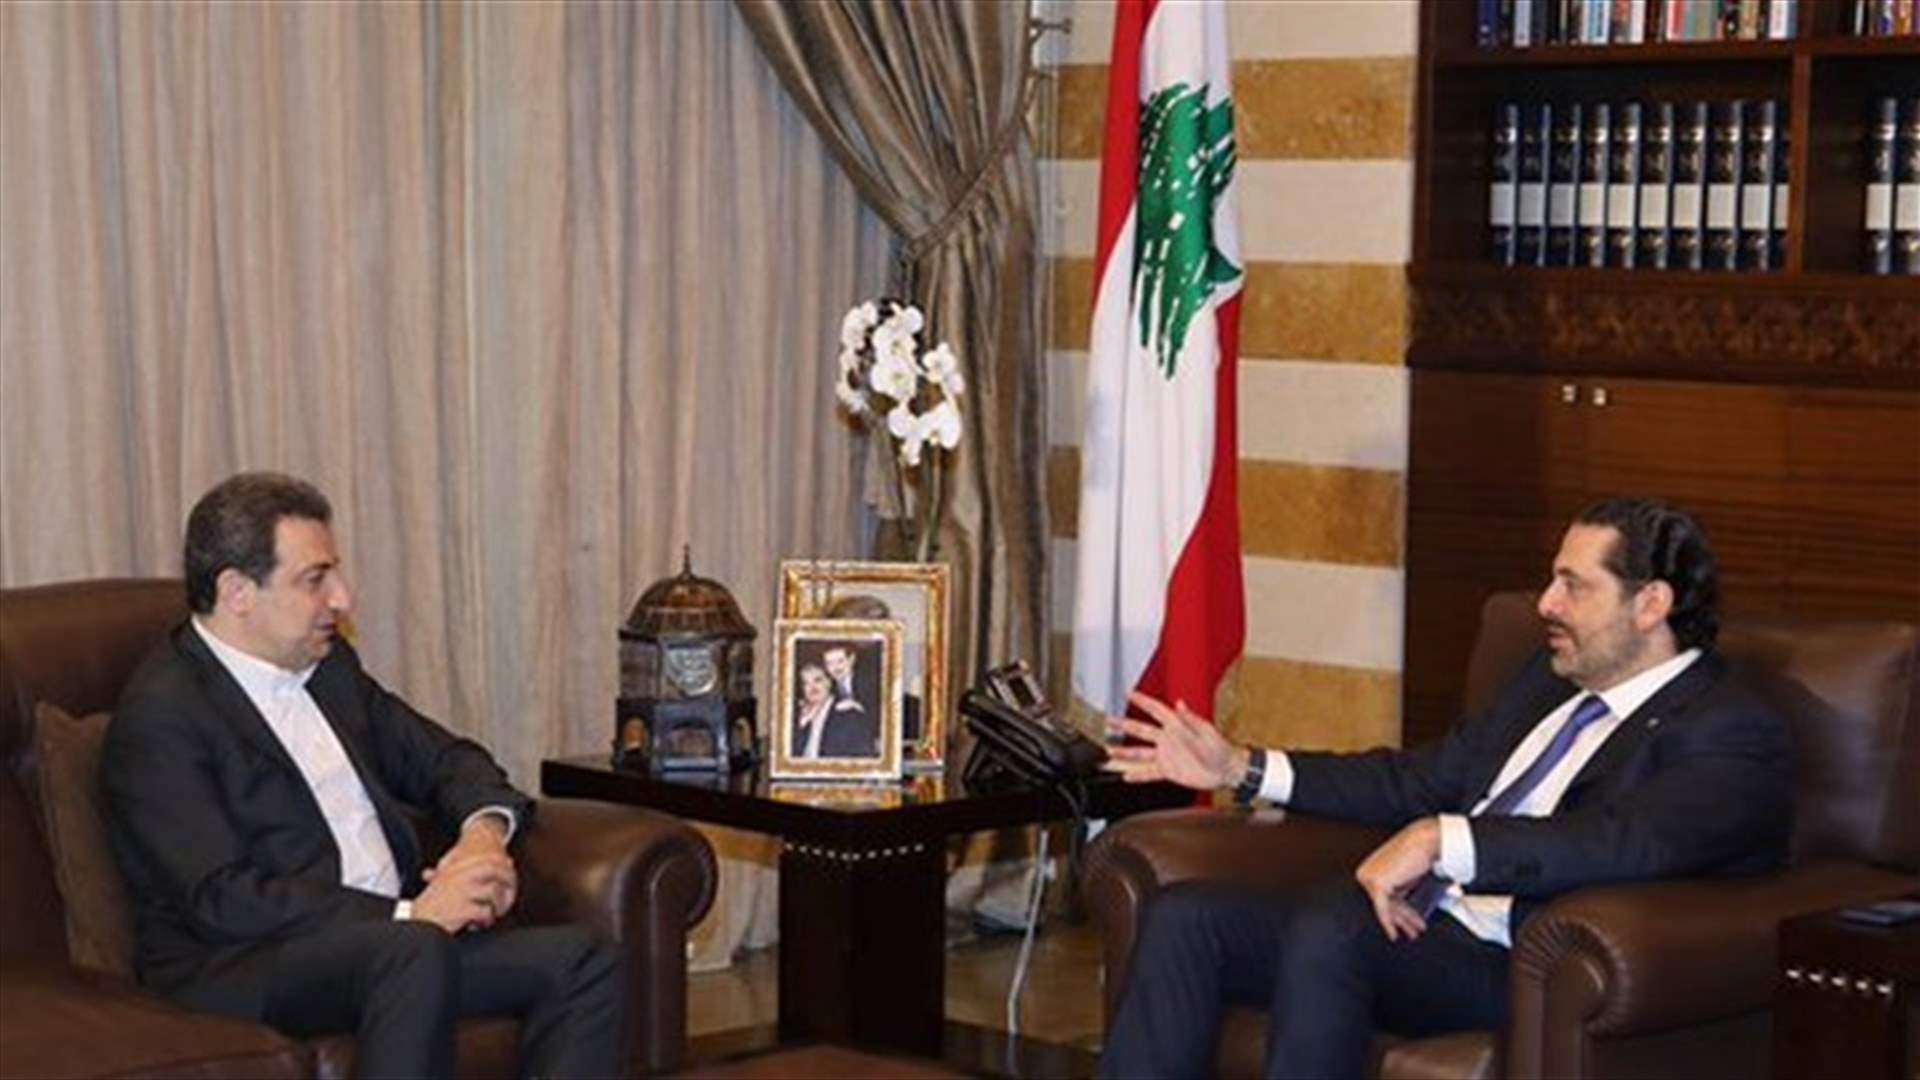 MP Abou Faour: Page of PM Hariri’s resignation is almost folded